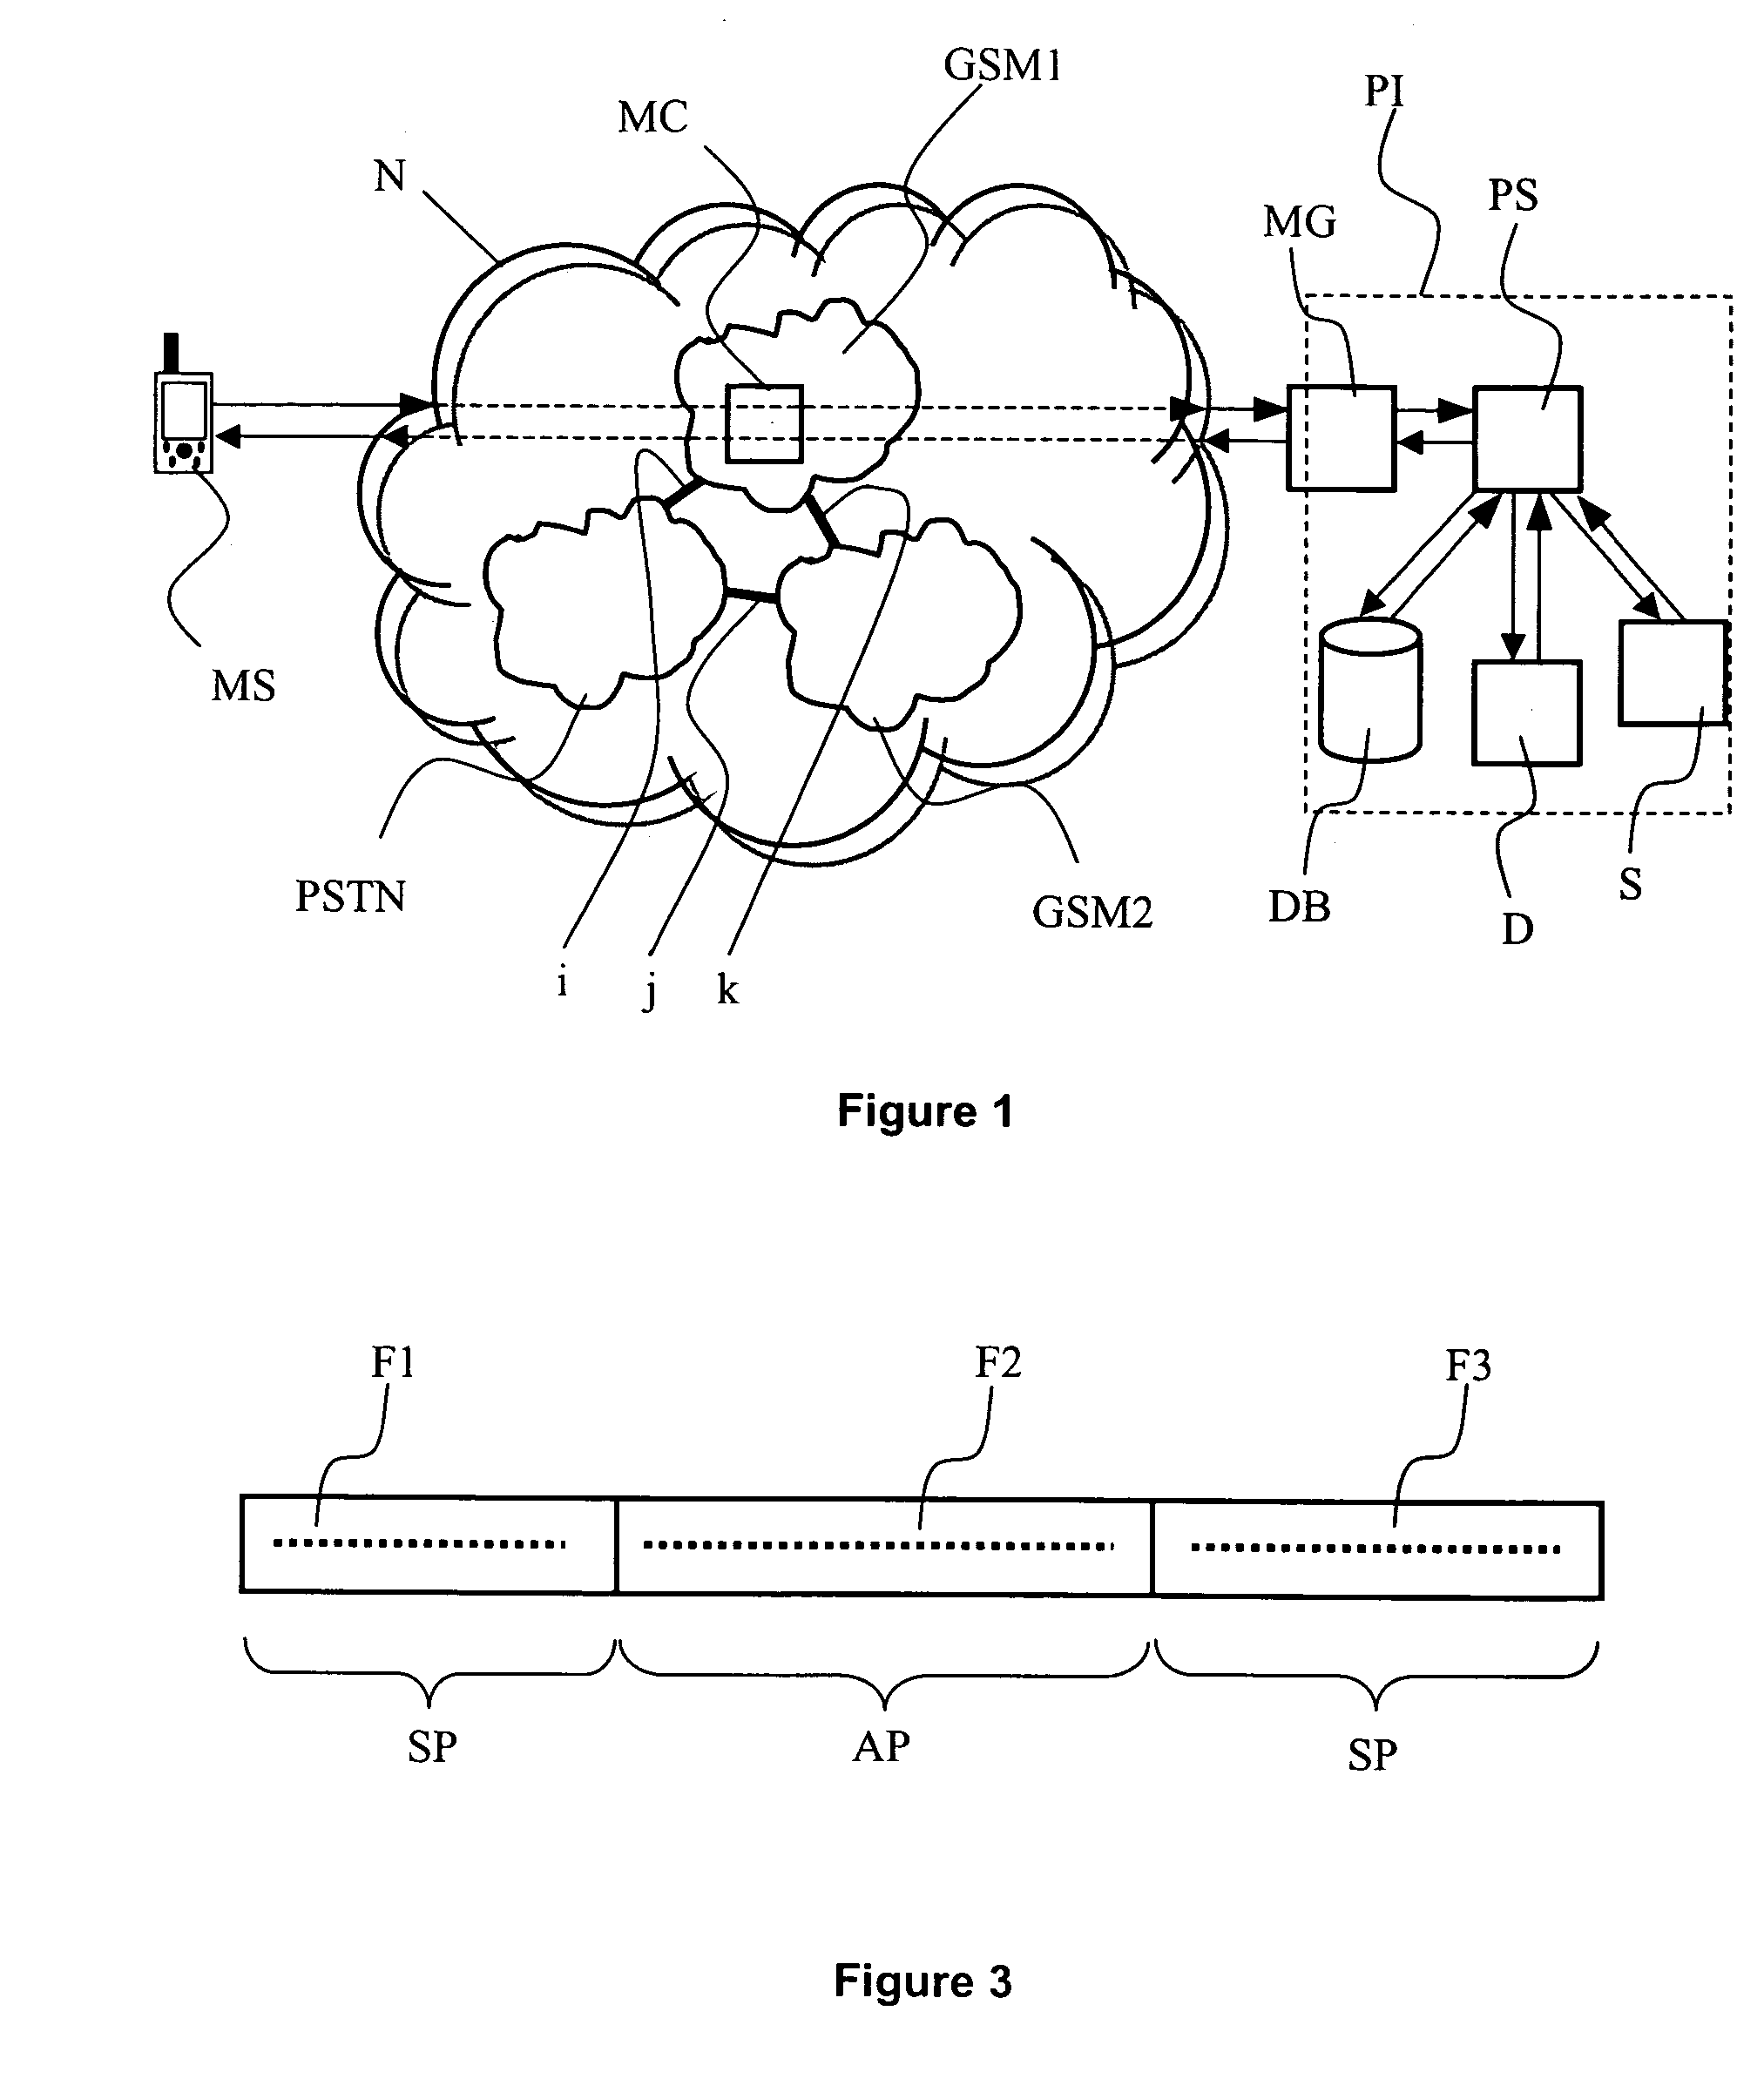 Authentication method for enabling a user of a mobile station to access to private data or services